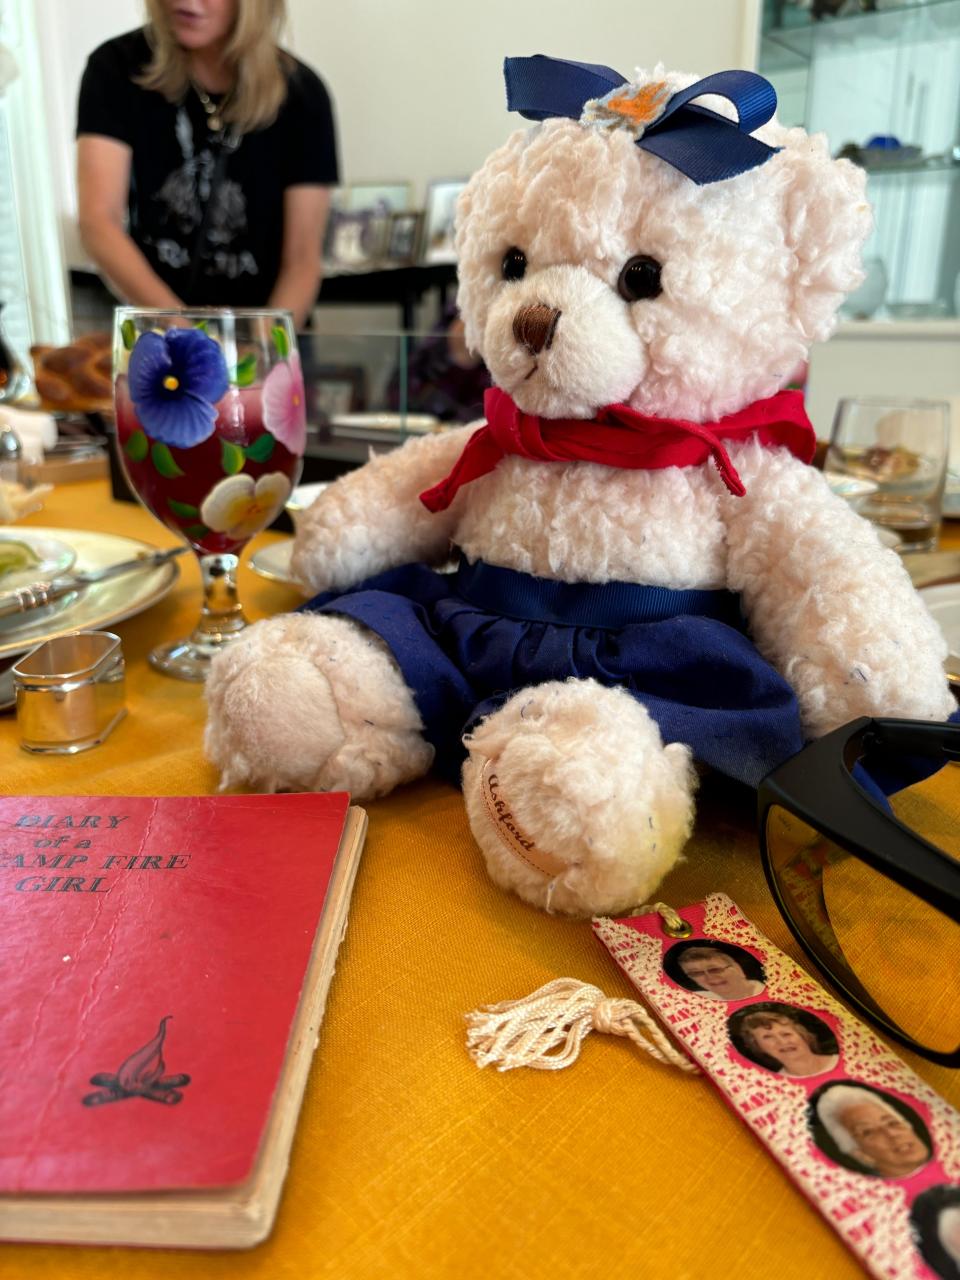 A diary of a former Camp Fire Girl (left), Evelyn Mintzer's teddy bear that Caryl Calsyn made after her stroke, and a bookmark with several Camp Fire Girls on it.